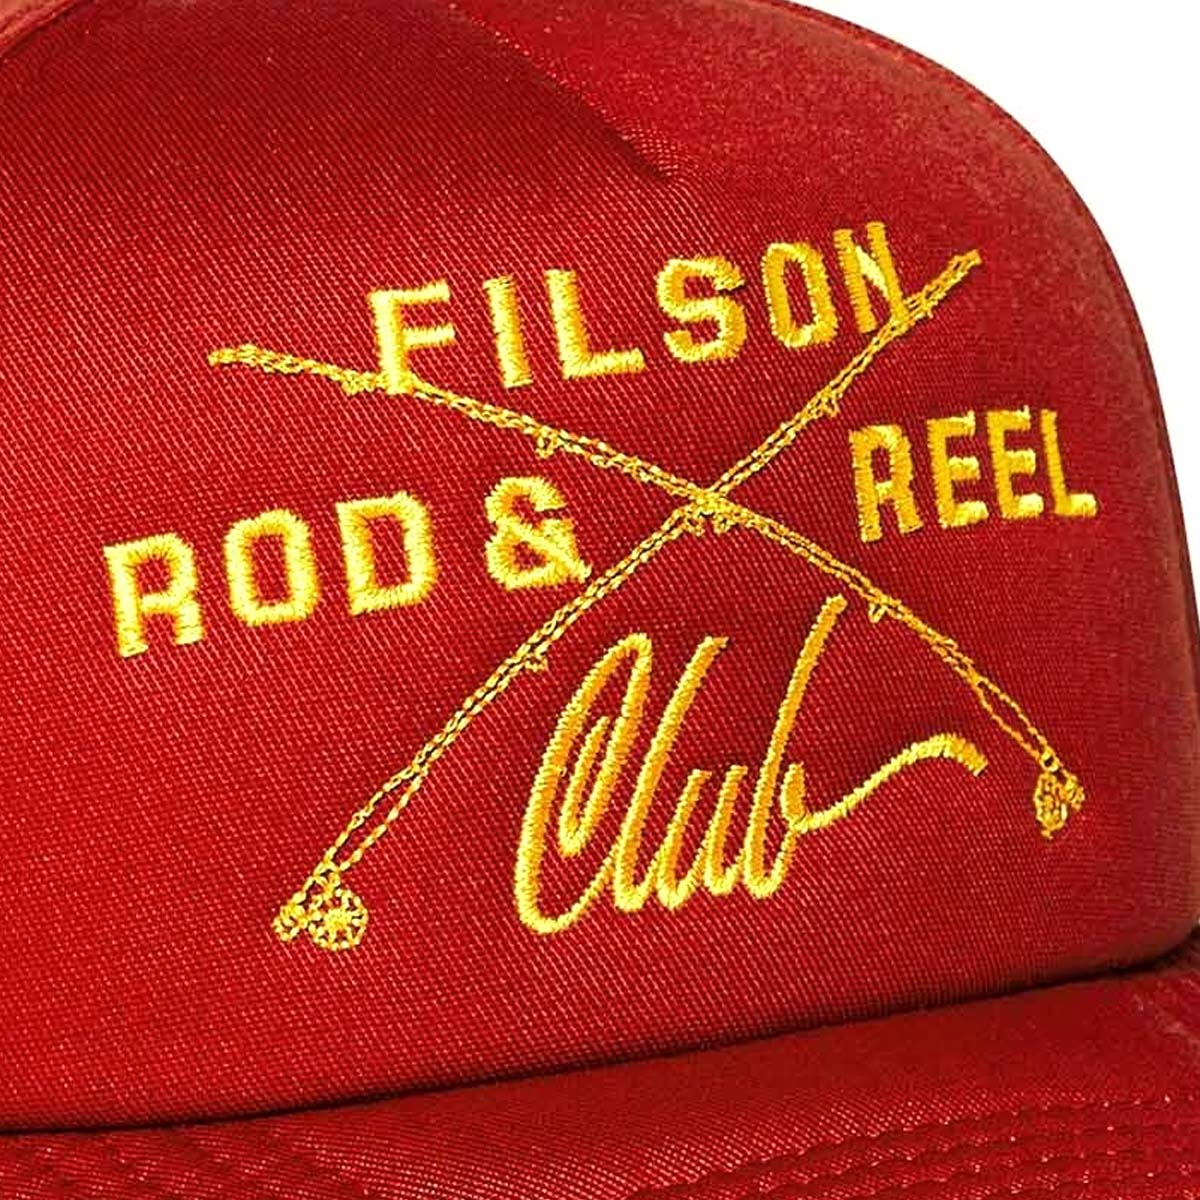 Filson Harvester Cap Rust/Rod And Reel Club, a classic five-panel design made with sturdy polyester/cotton blend for years of service